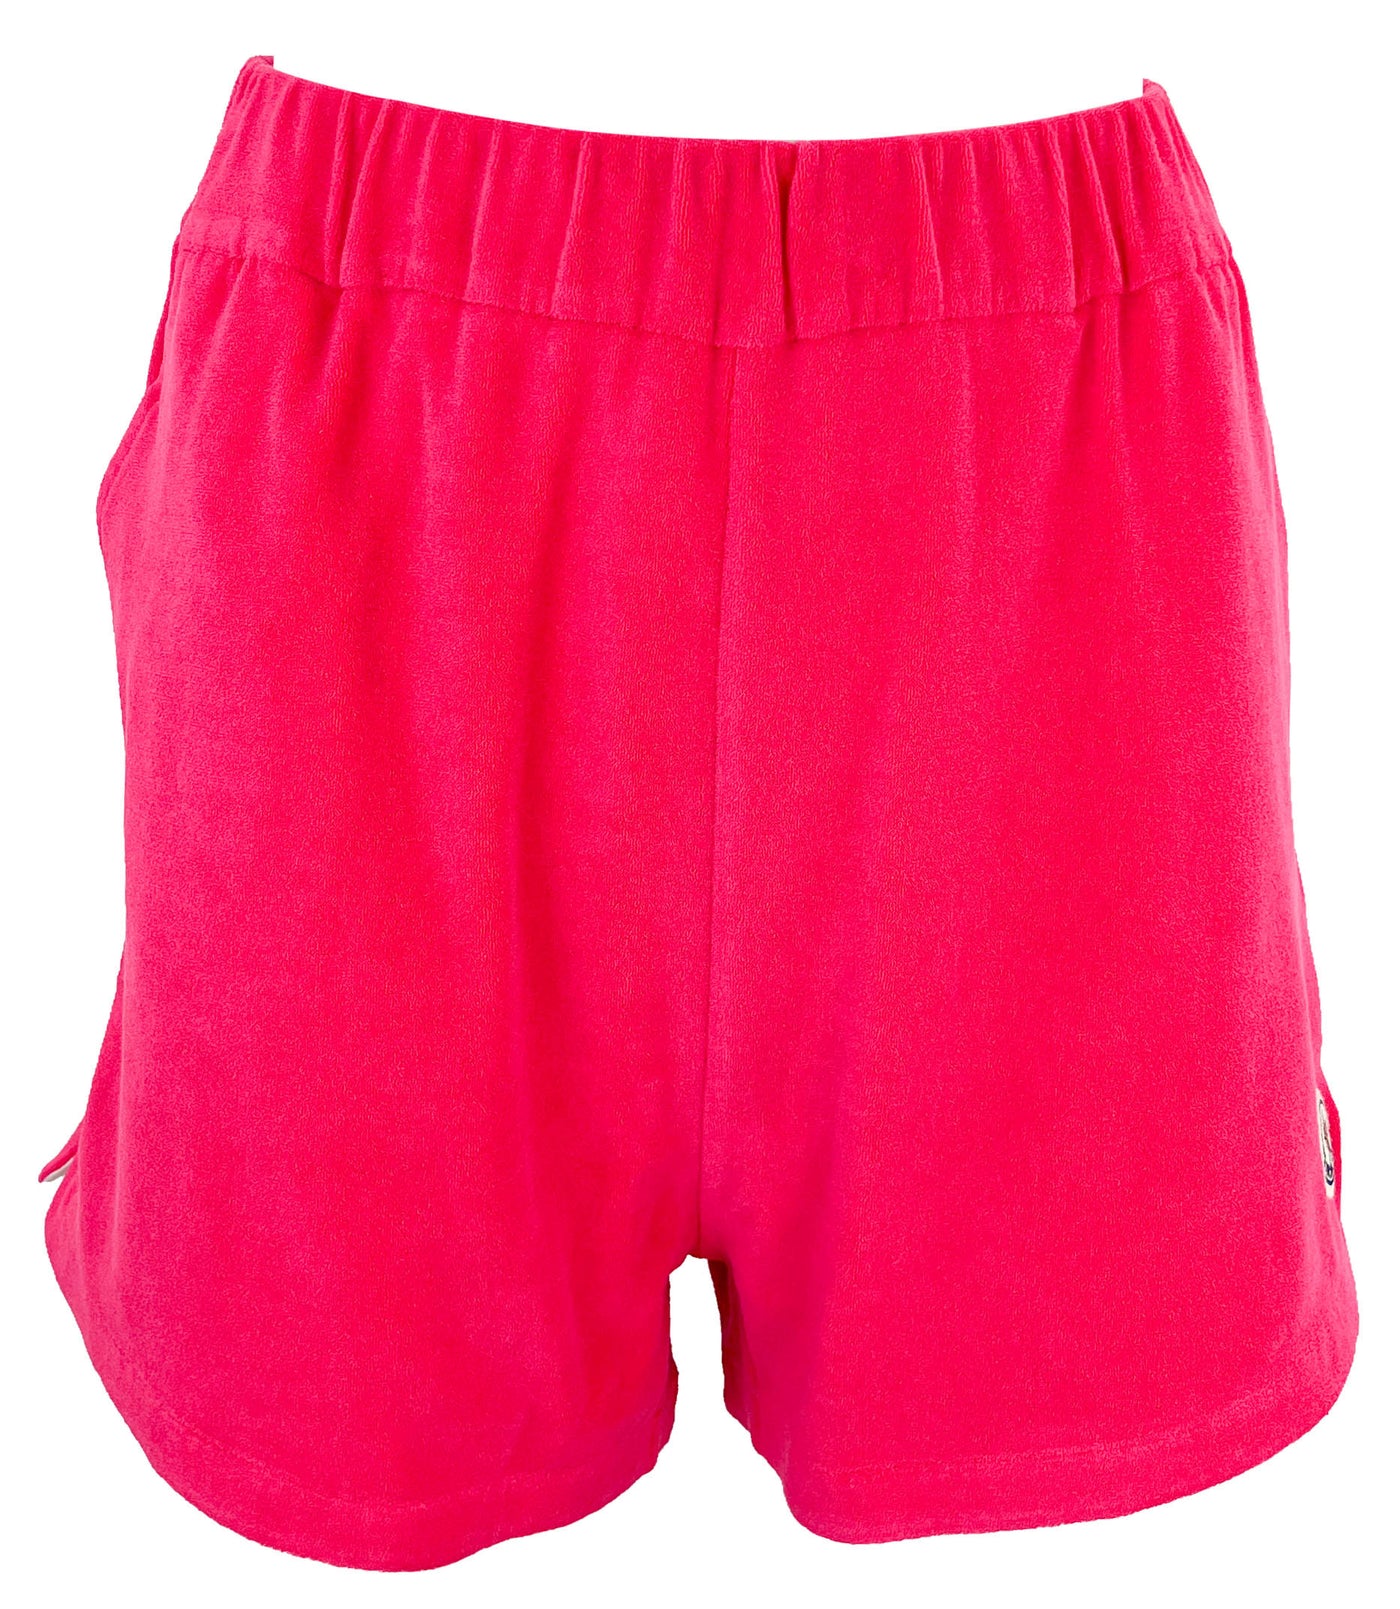 Moncler Sweat Shorts in Pink - Discounts on Moncler at UAL